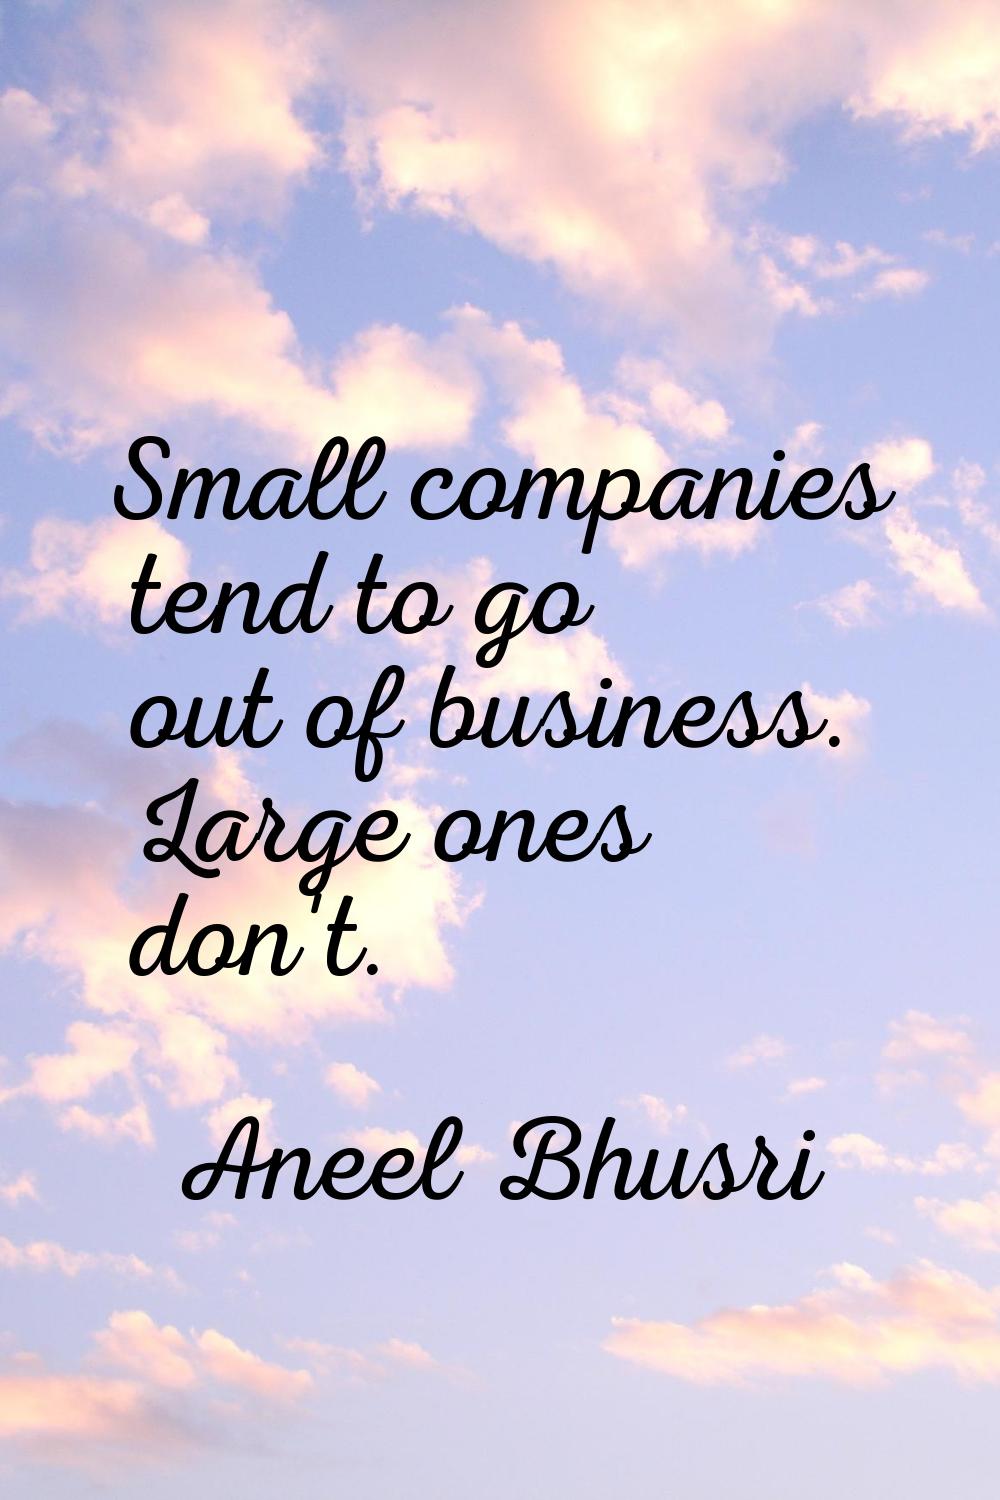 Small companies tend to go out of business. Large ones don't.